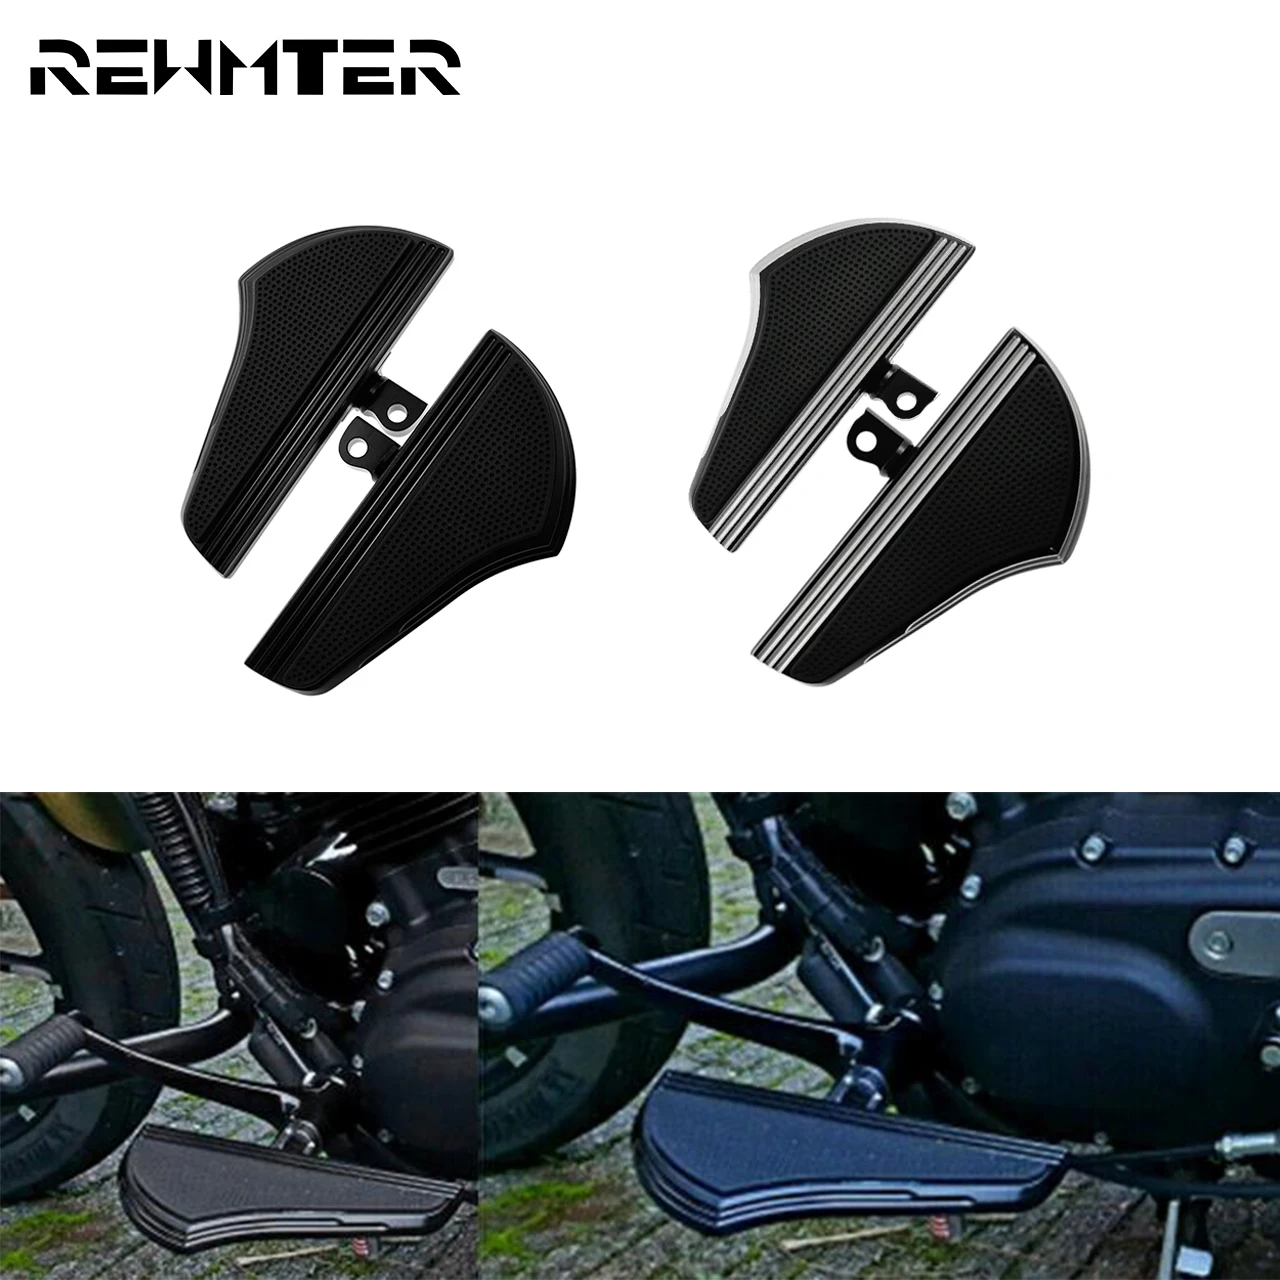 

Motorcycle Rear Passenger Floorboards CNC Male Mount Foot Pegs Footrest For Harley Touring Sportster XL883 Electra Glide Dyna